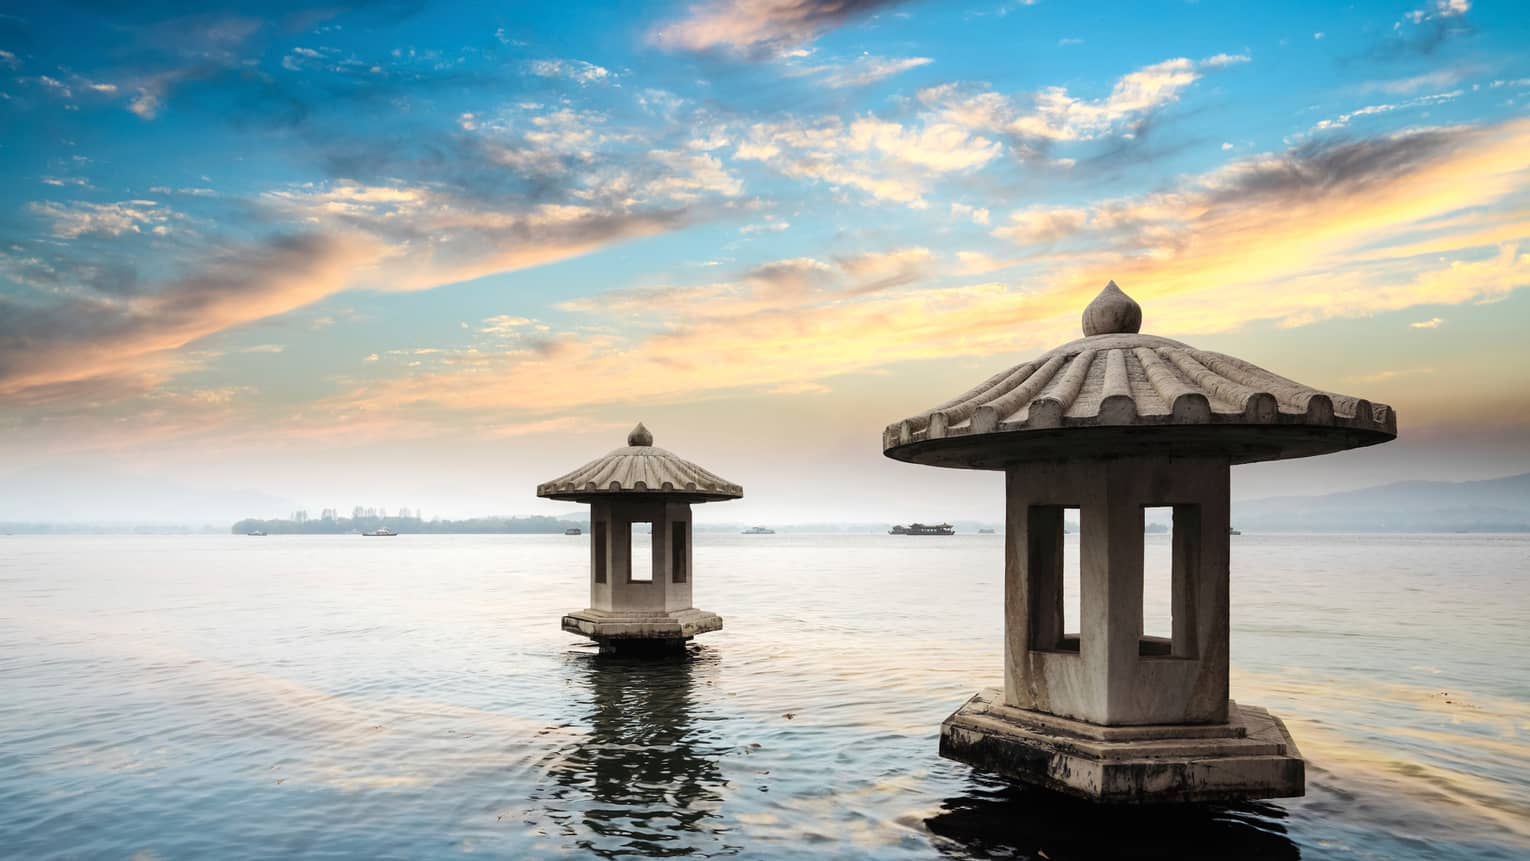 Sunset reflected on West Lake, two cement pagoda structures in water 